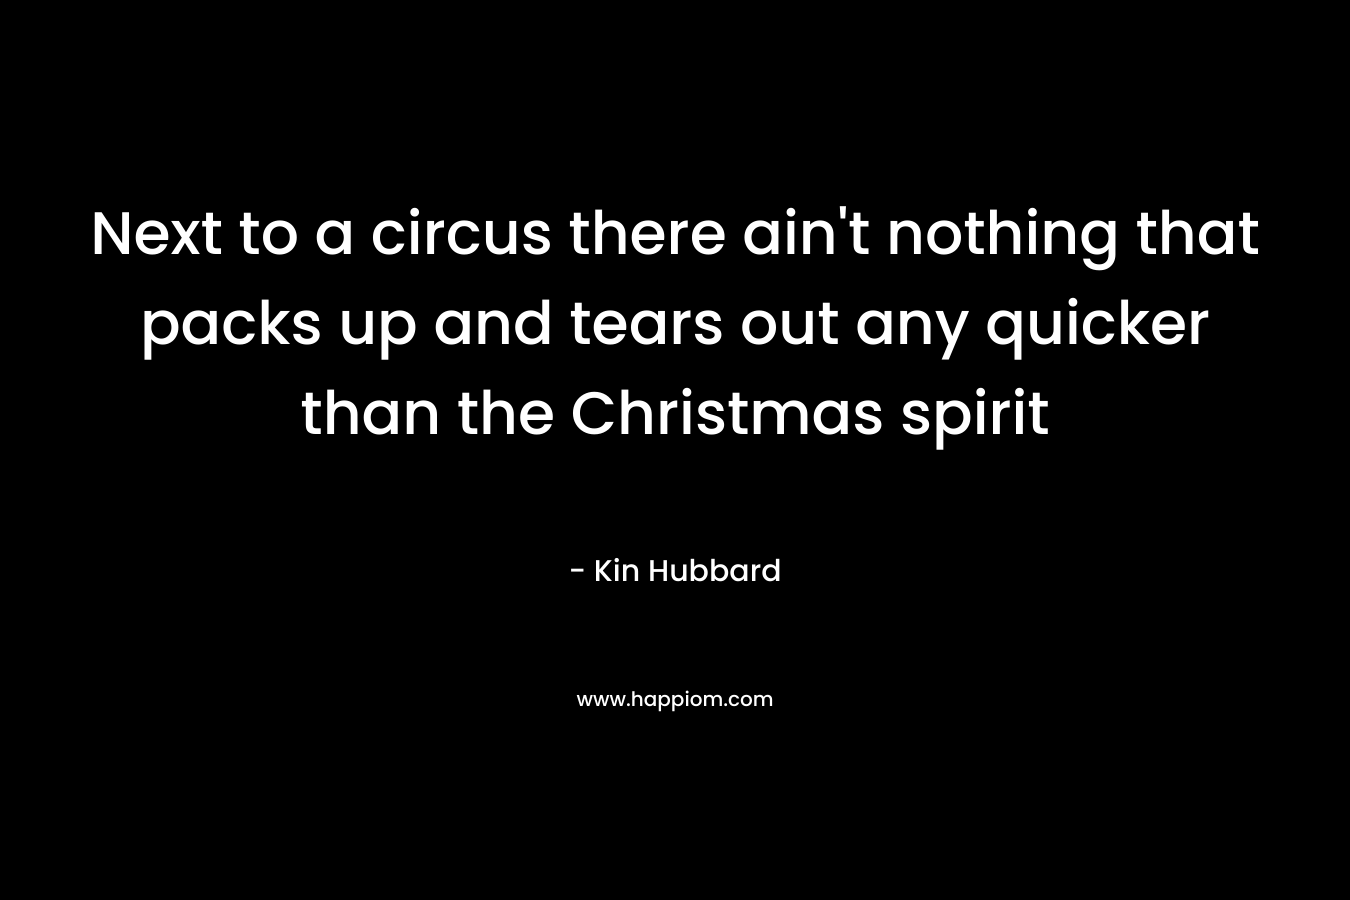 Next to a circus there ain’t nothing that packs up and tears out any quicker than the Christmas spirit – Kin Hubbard